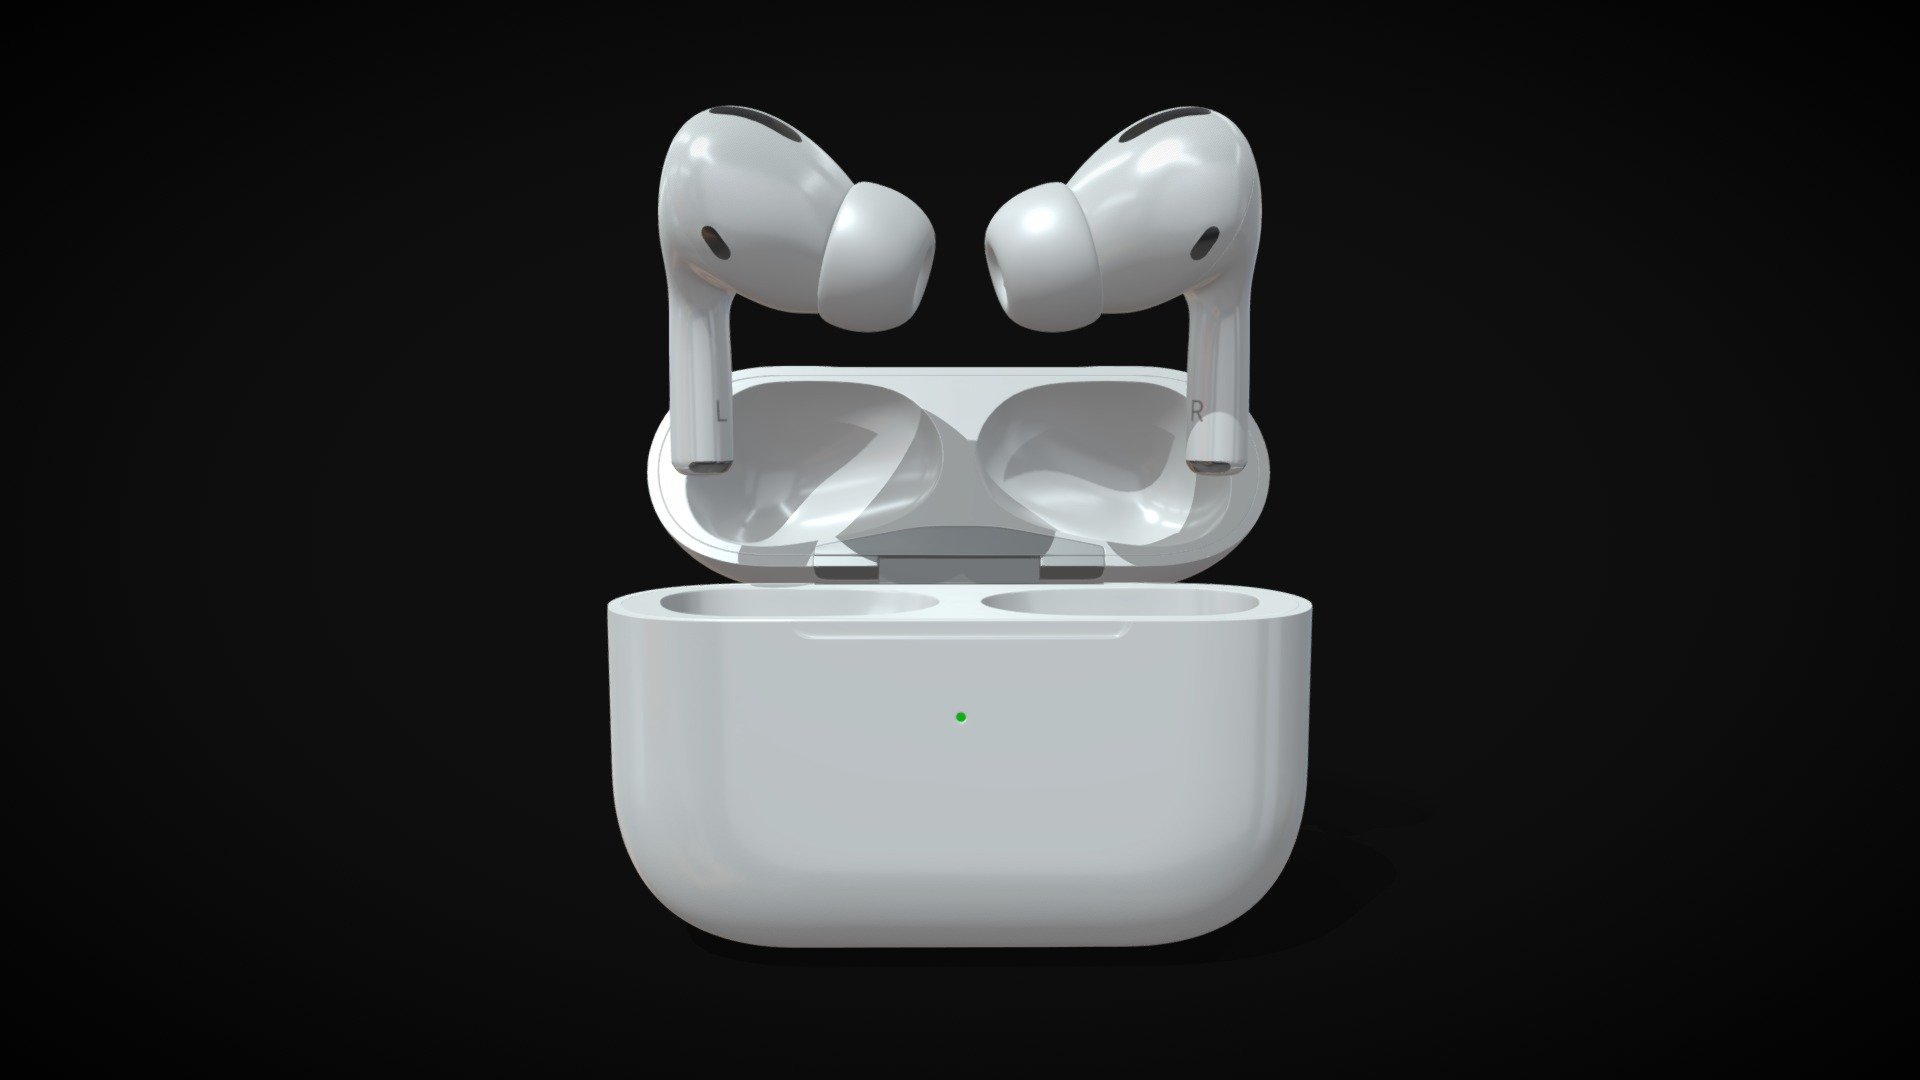 Apple AirPods Pro.

This set:
3D element v2.2
The model given is easy to use
- 1 file obj standard
- 1 file 3ds Max 2013 vray material
- 1 file 3ds Max 2013 corona material
- 1 file of 3Ds
- 1 file e3d full set of materials
- 1 file Cinema 4d standard

Topology of geometry:




forms and proportions of The 3D model

the geometry of the model was created very neatly

there are no many-sided polygons

detailed enough for close-up renders

the model optimized for turbosmooth modifier

Not collapsed the turbosmooth modified

apply the Smooth modifier with a parameter to get the desired level of detail

Materials and Textures:




3ds max files included Vray-Shaders

3ds max files included Corona-Shaders

file e3d full set of materials

all texture paths are cleared

Organization of scene:




to all objects and materials

real world size (system units - mm)

coordinates of location of the model in space (x0, y0, z0)

does not contain extraneous or hidden objects (lights, cameras, shapes etc.)
 - Apple AirPods Pro - Buy Royalty Free 3D model by madMIX 3d model